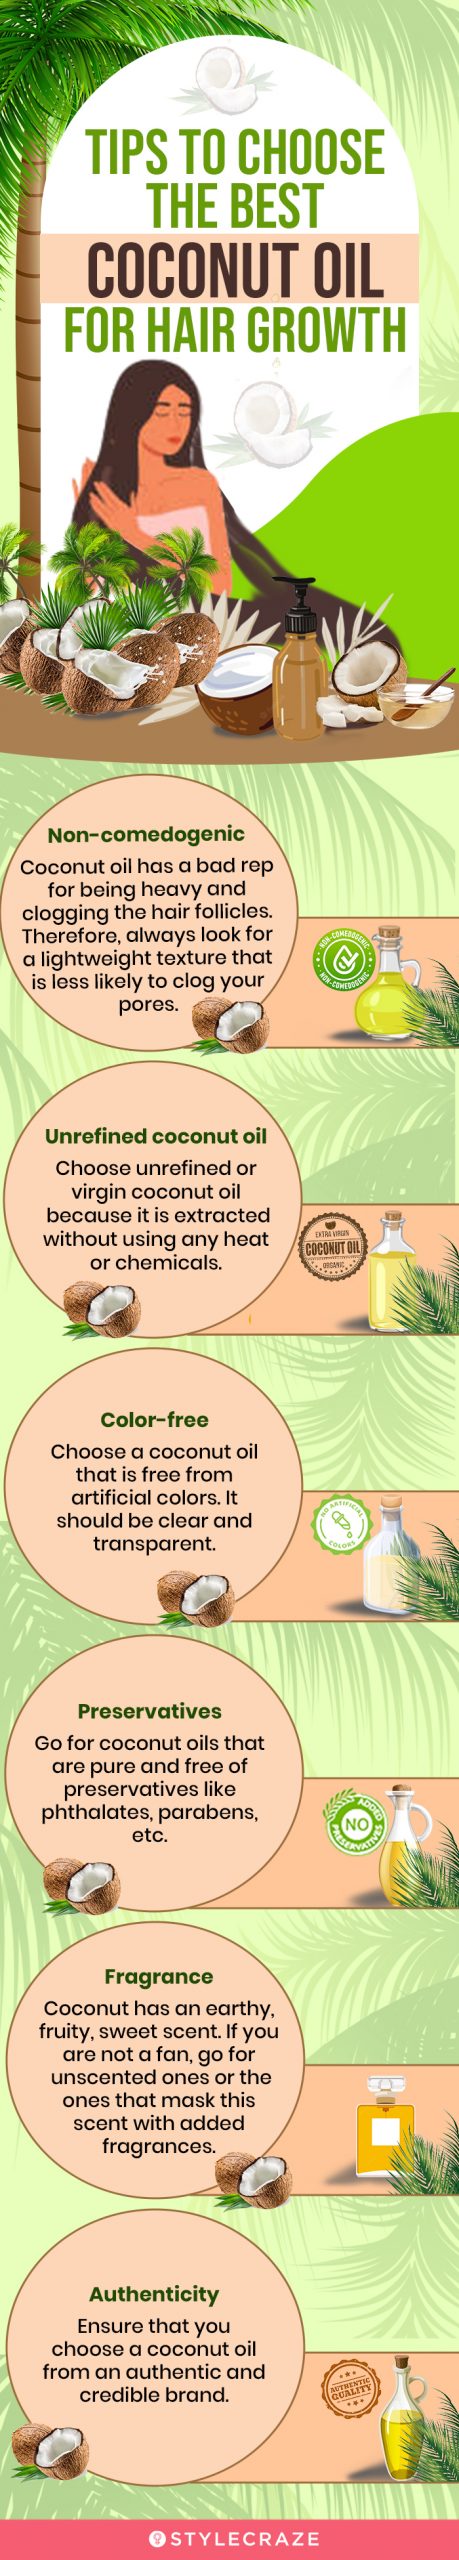 Tips To Choose The Best Coconut Oil For Hair Growth (infographic)